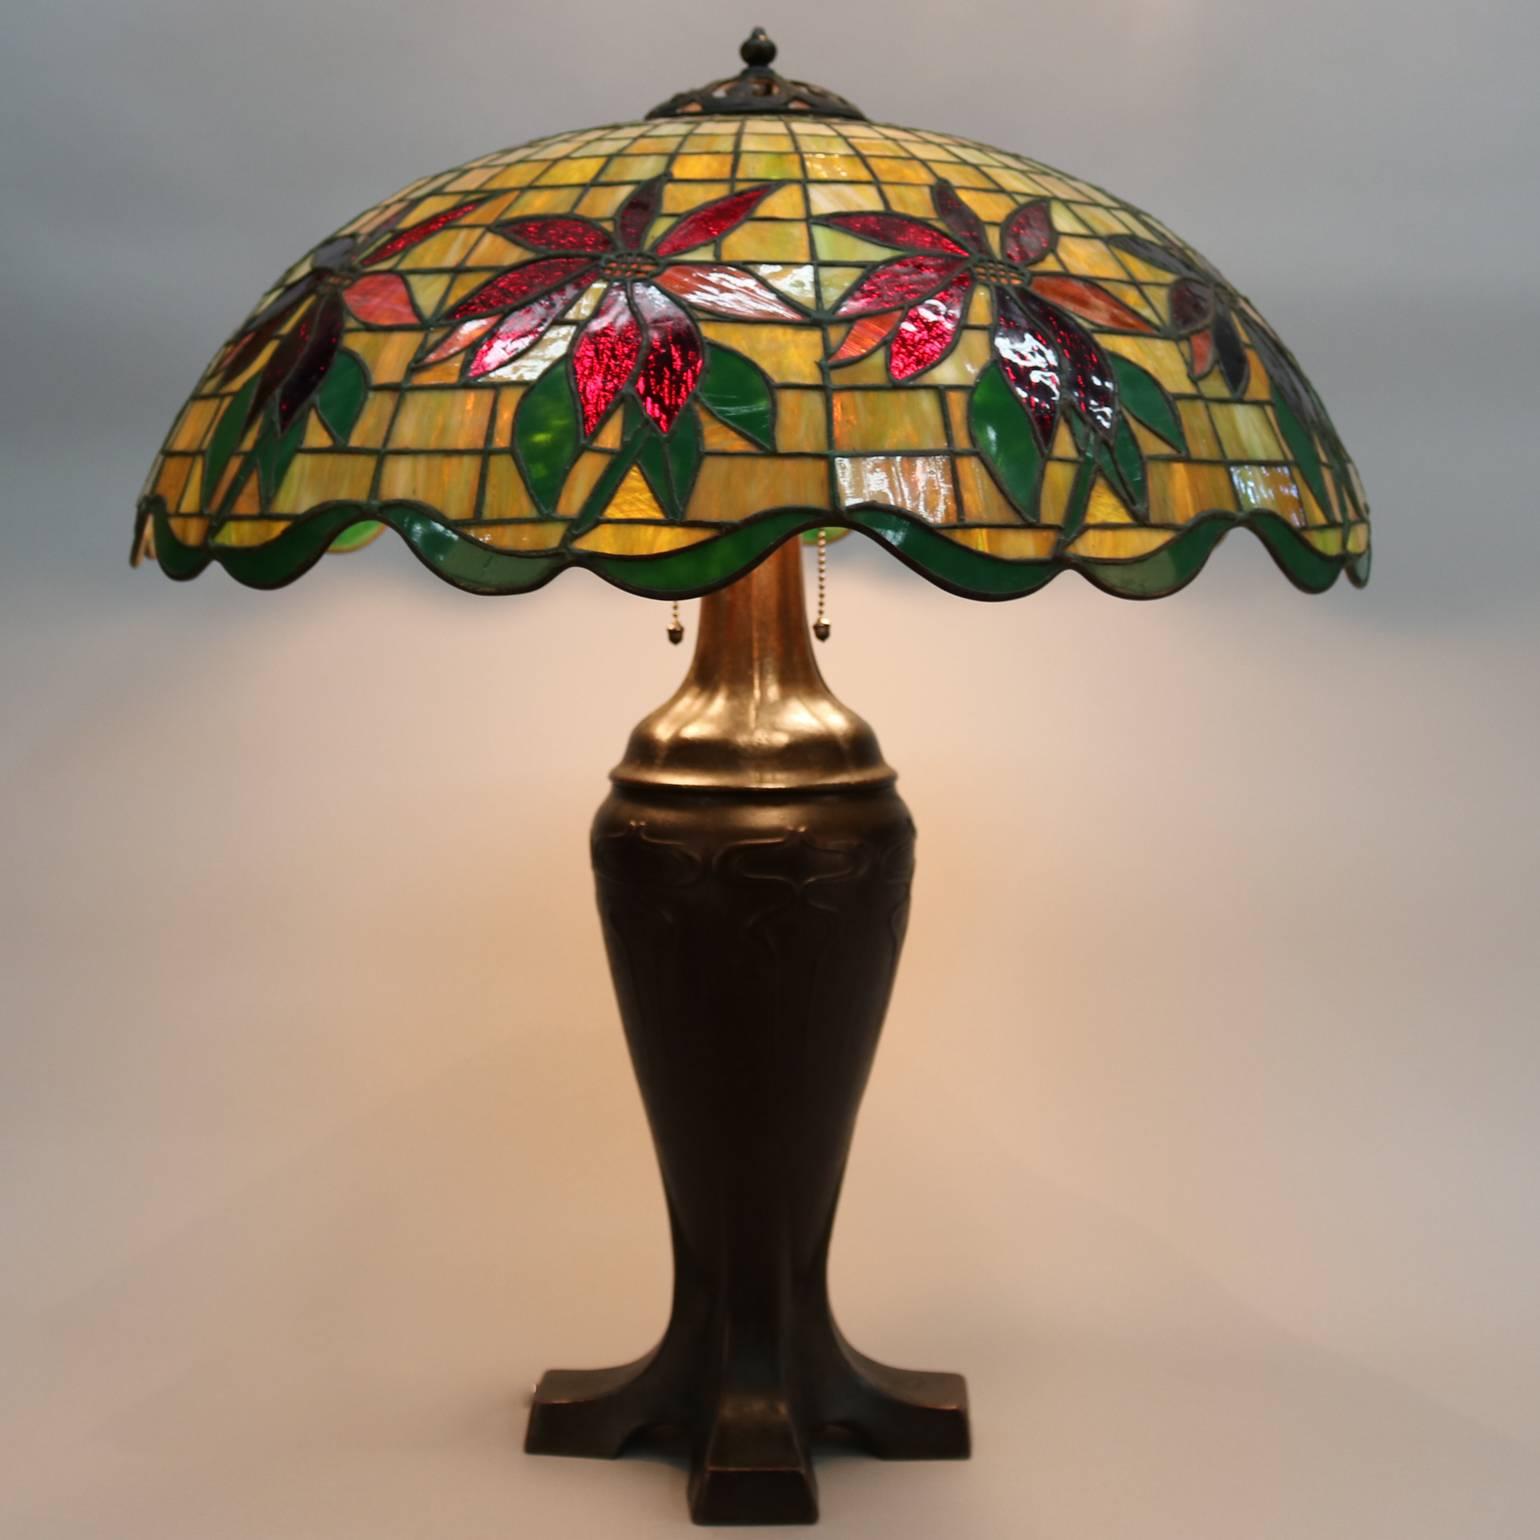 Antique handel leaded stained glass lamp features dome shade with mosaic poinsettia design, the footed standard with an Art Deco form rising to support a three-socket cluster, reminiscent of lamps by Louis Comfort Tiffany of Tiffany Studios, circa